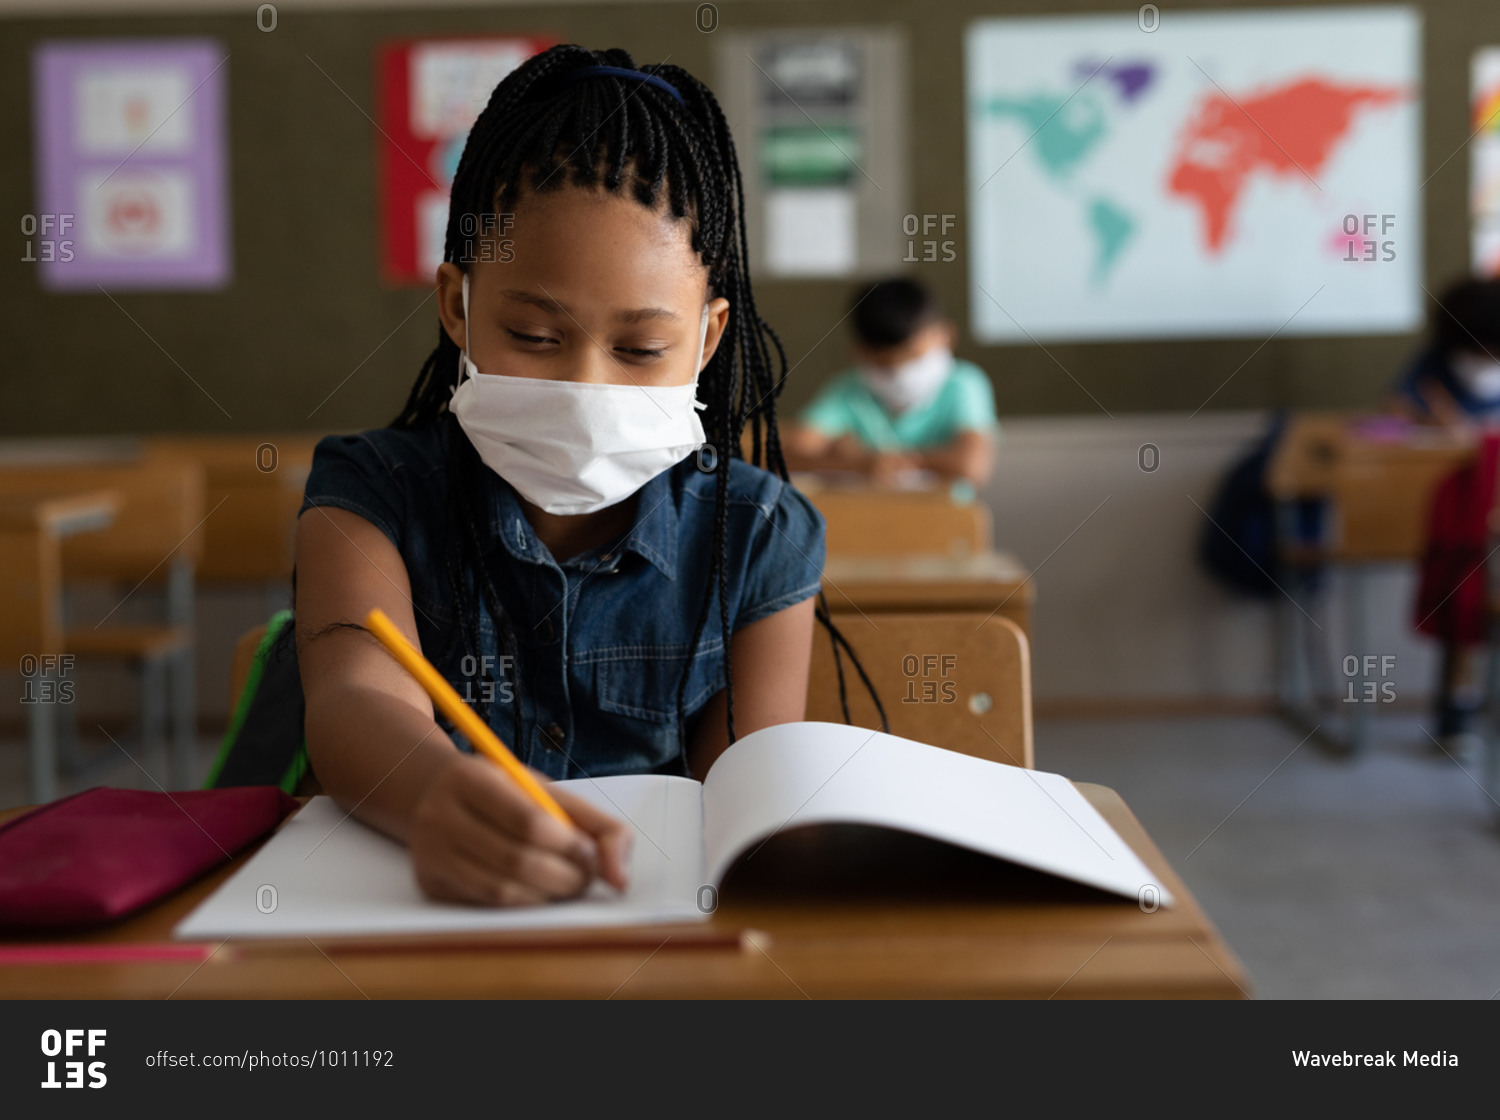 Mixed race girl sitting at desks wearing face mask in classroom. Primary education social distancing health safety during Covid19 Coronavirus pandemic.